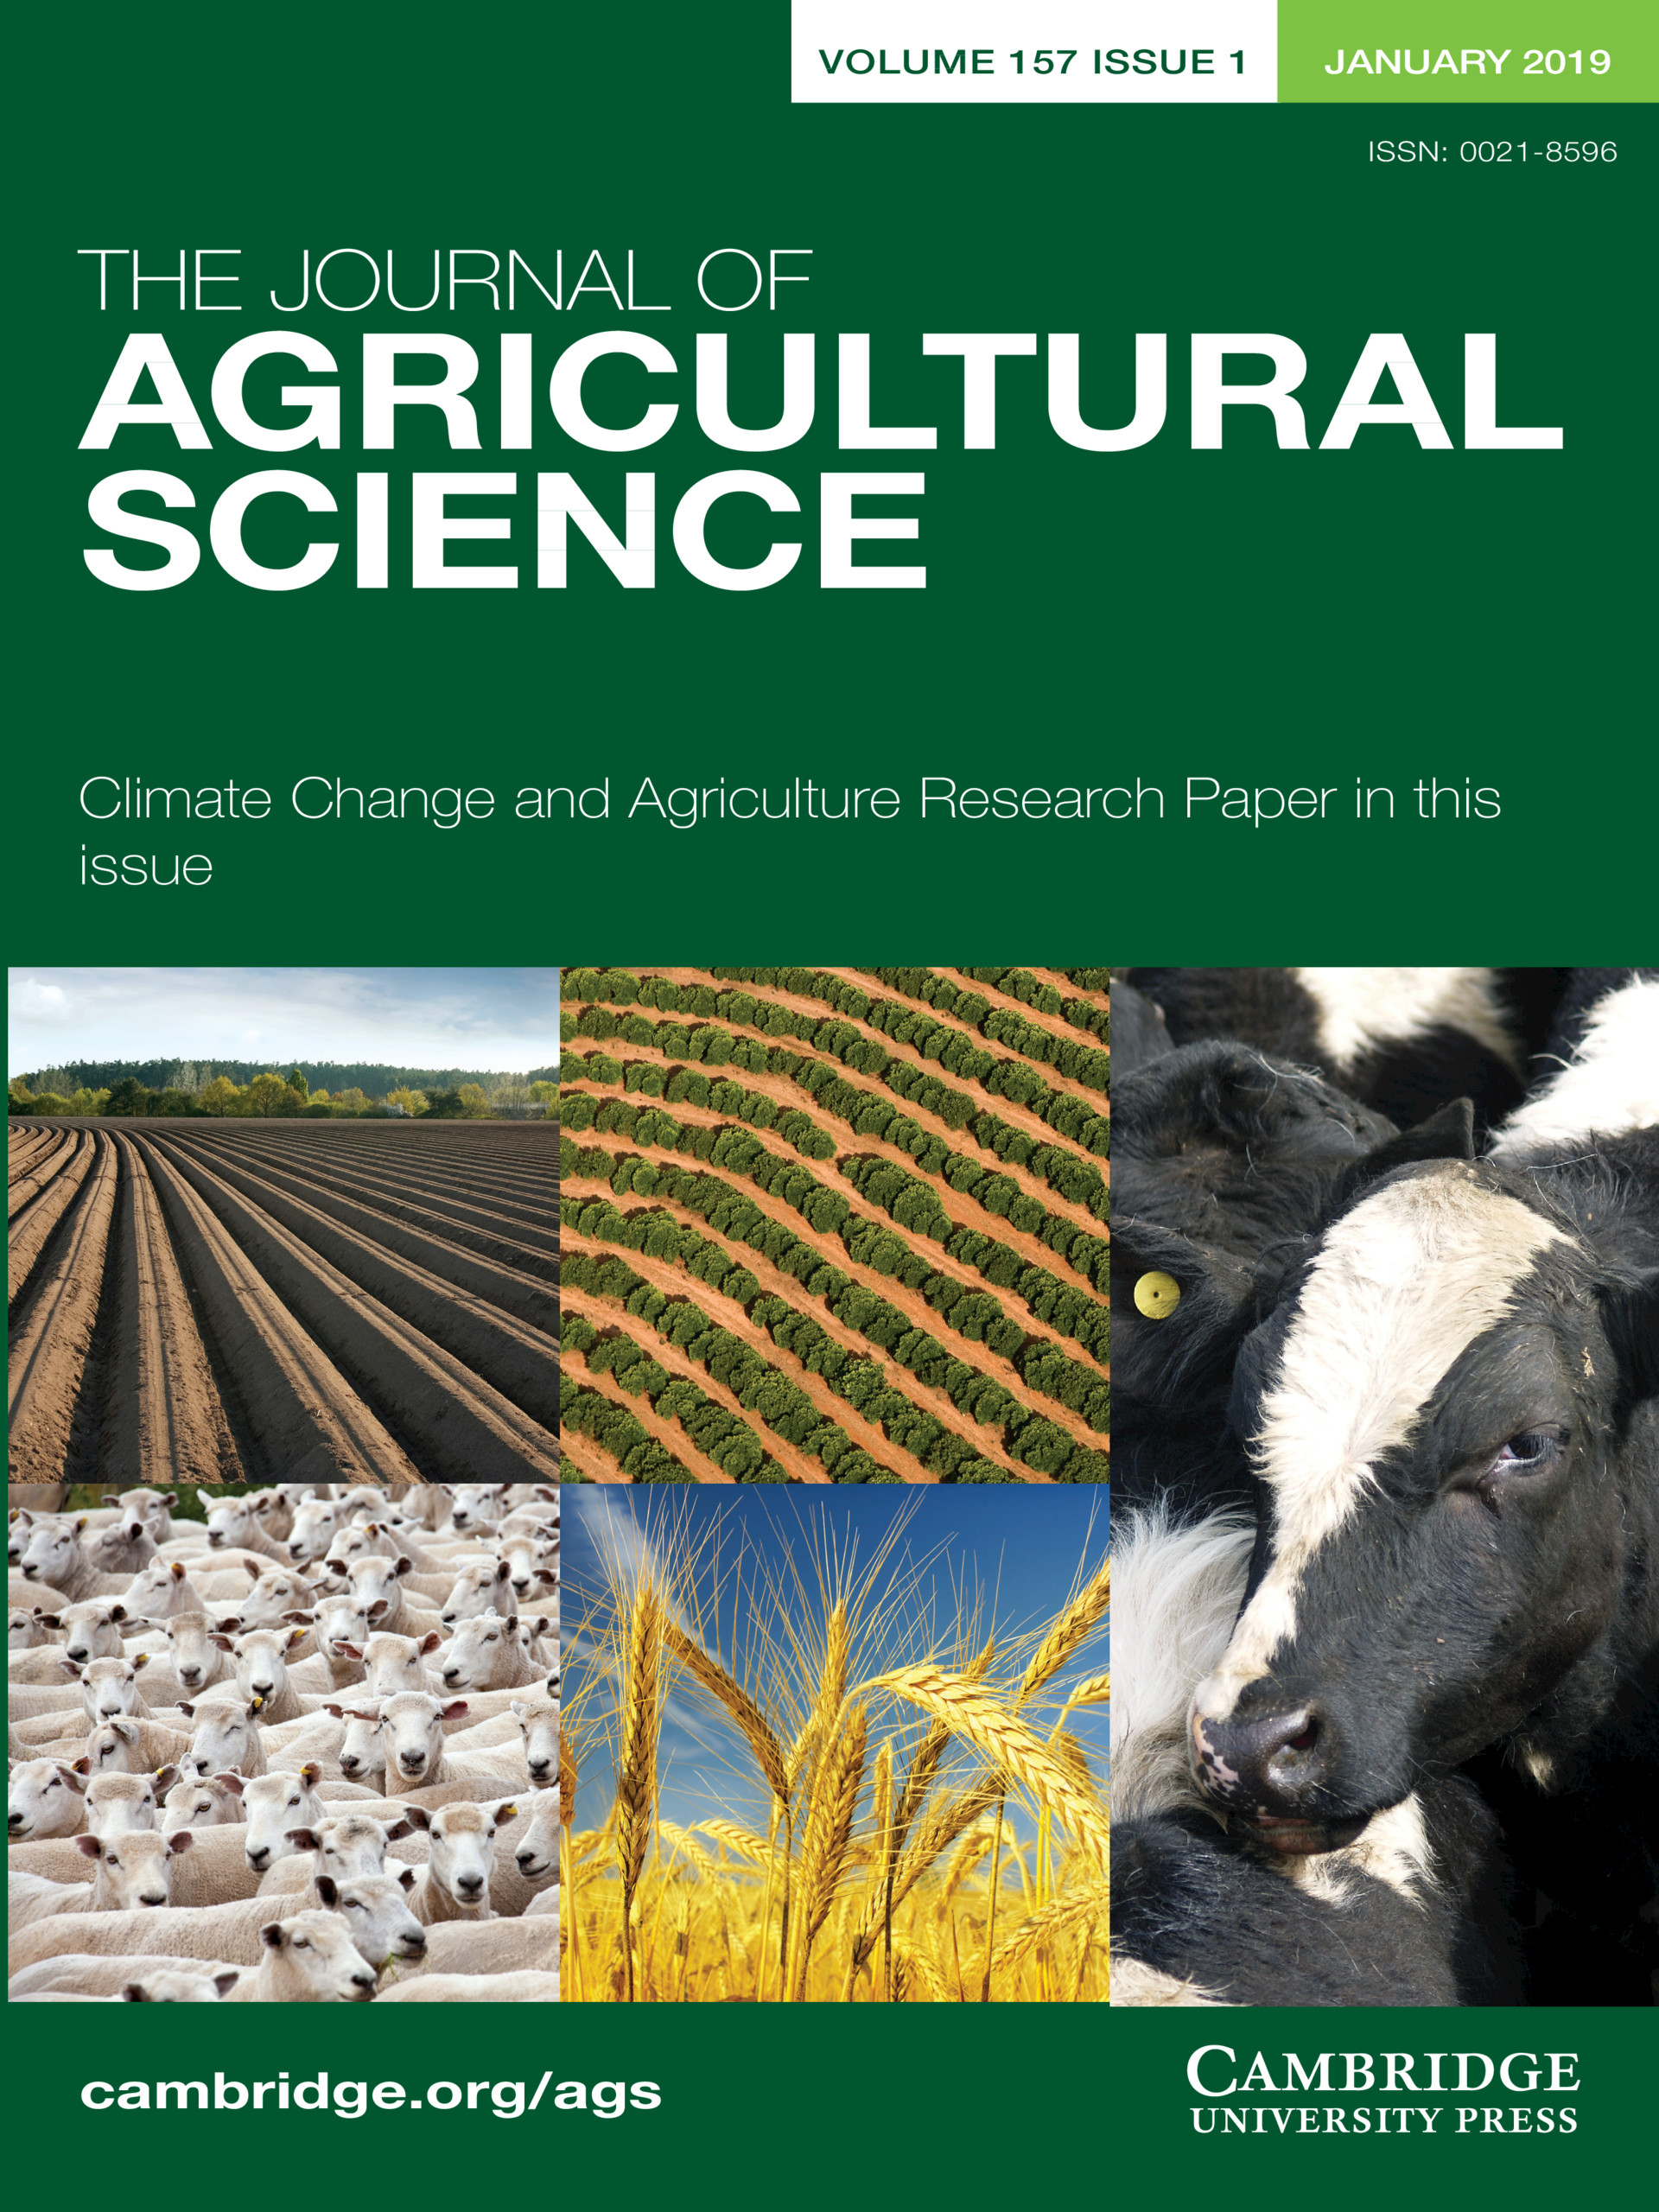 case study sample in agriculture